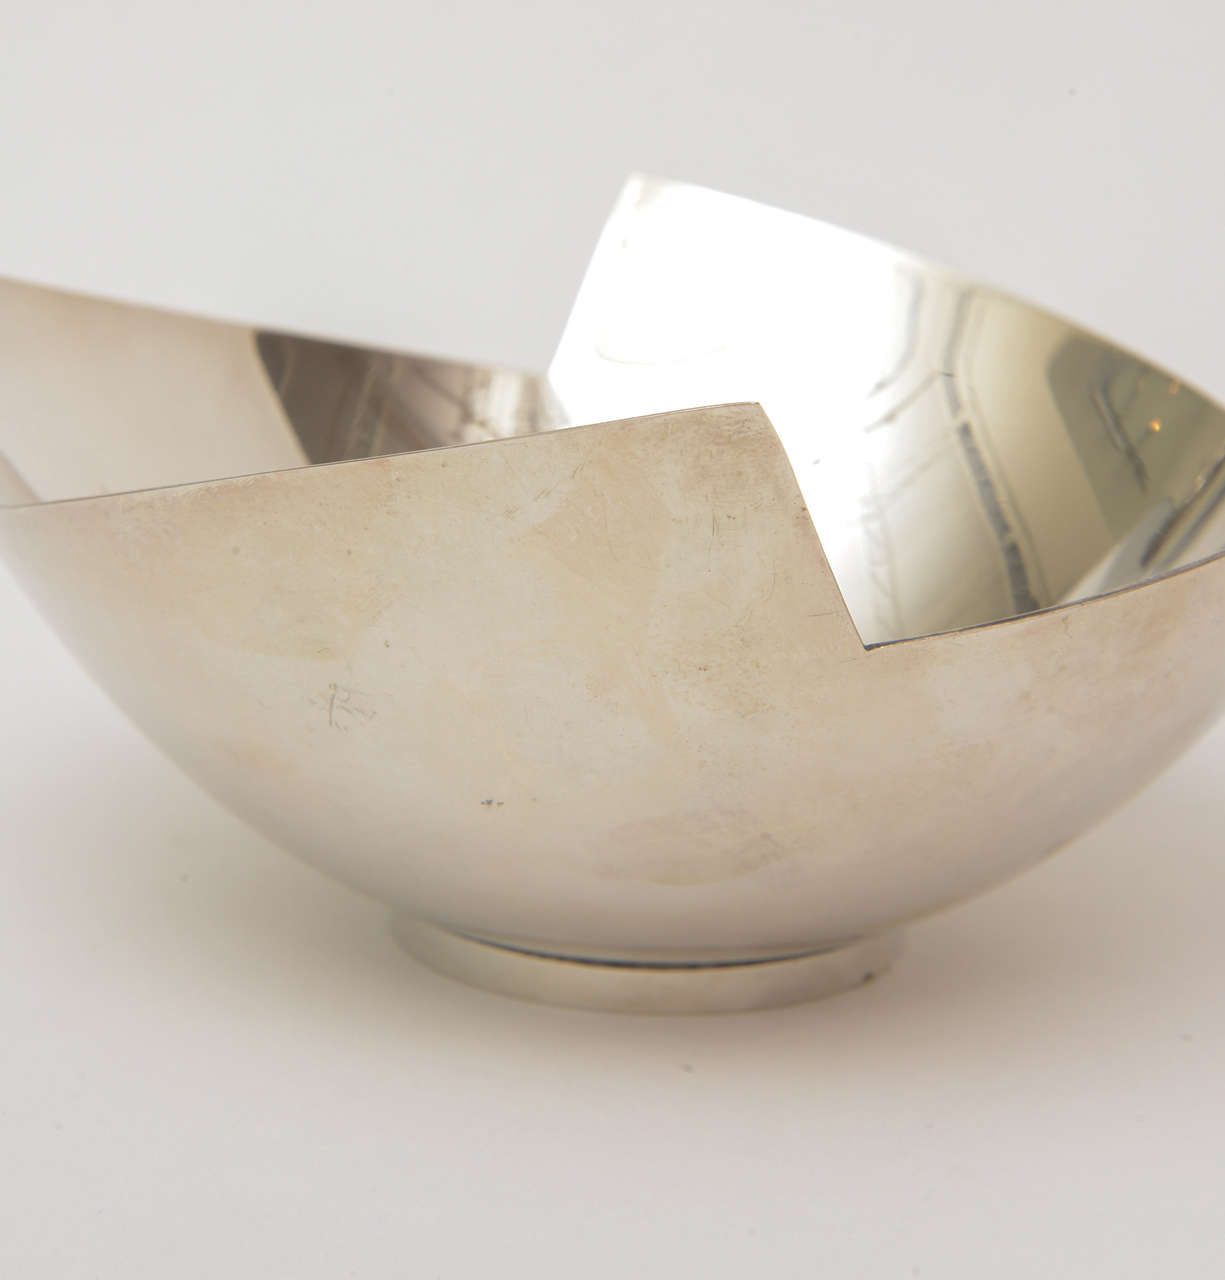 Signed Sculptural Silver Plate Bowl by Elsa Rady for Swid Powell 2